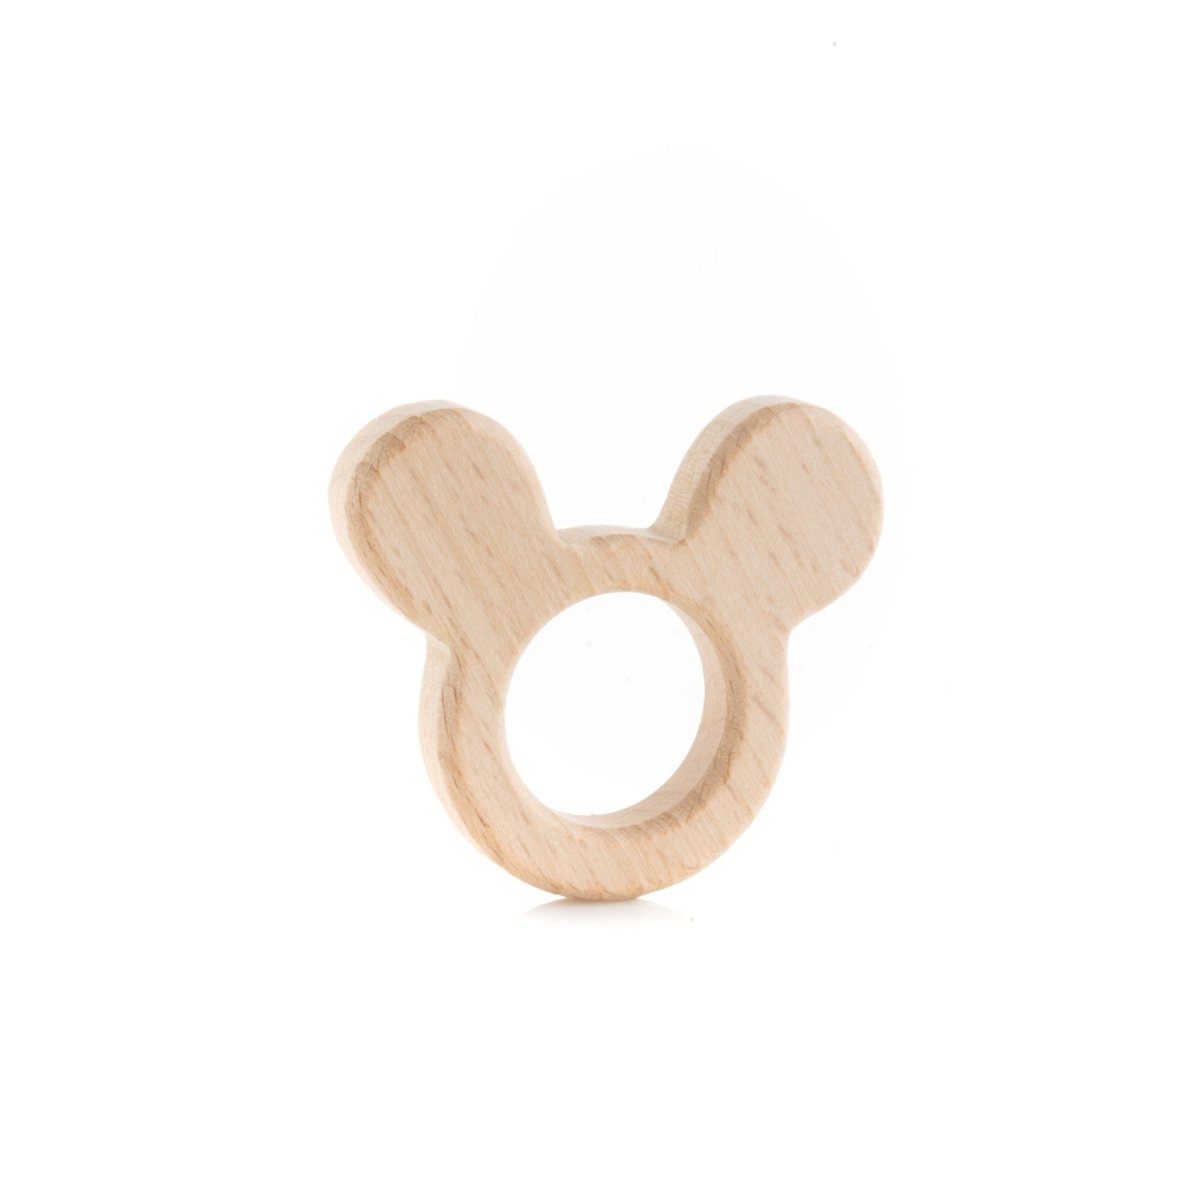 Wood Rings & Pendants Small - Beech Wood Mickey Mouse from Cara & Co Craft Supply